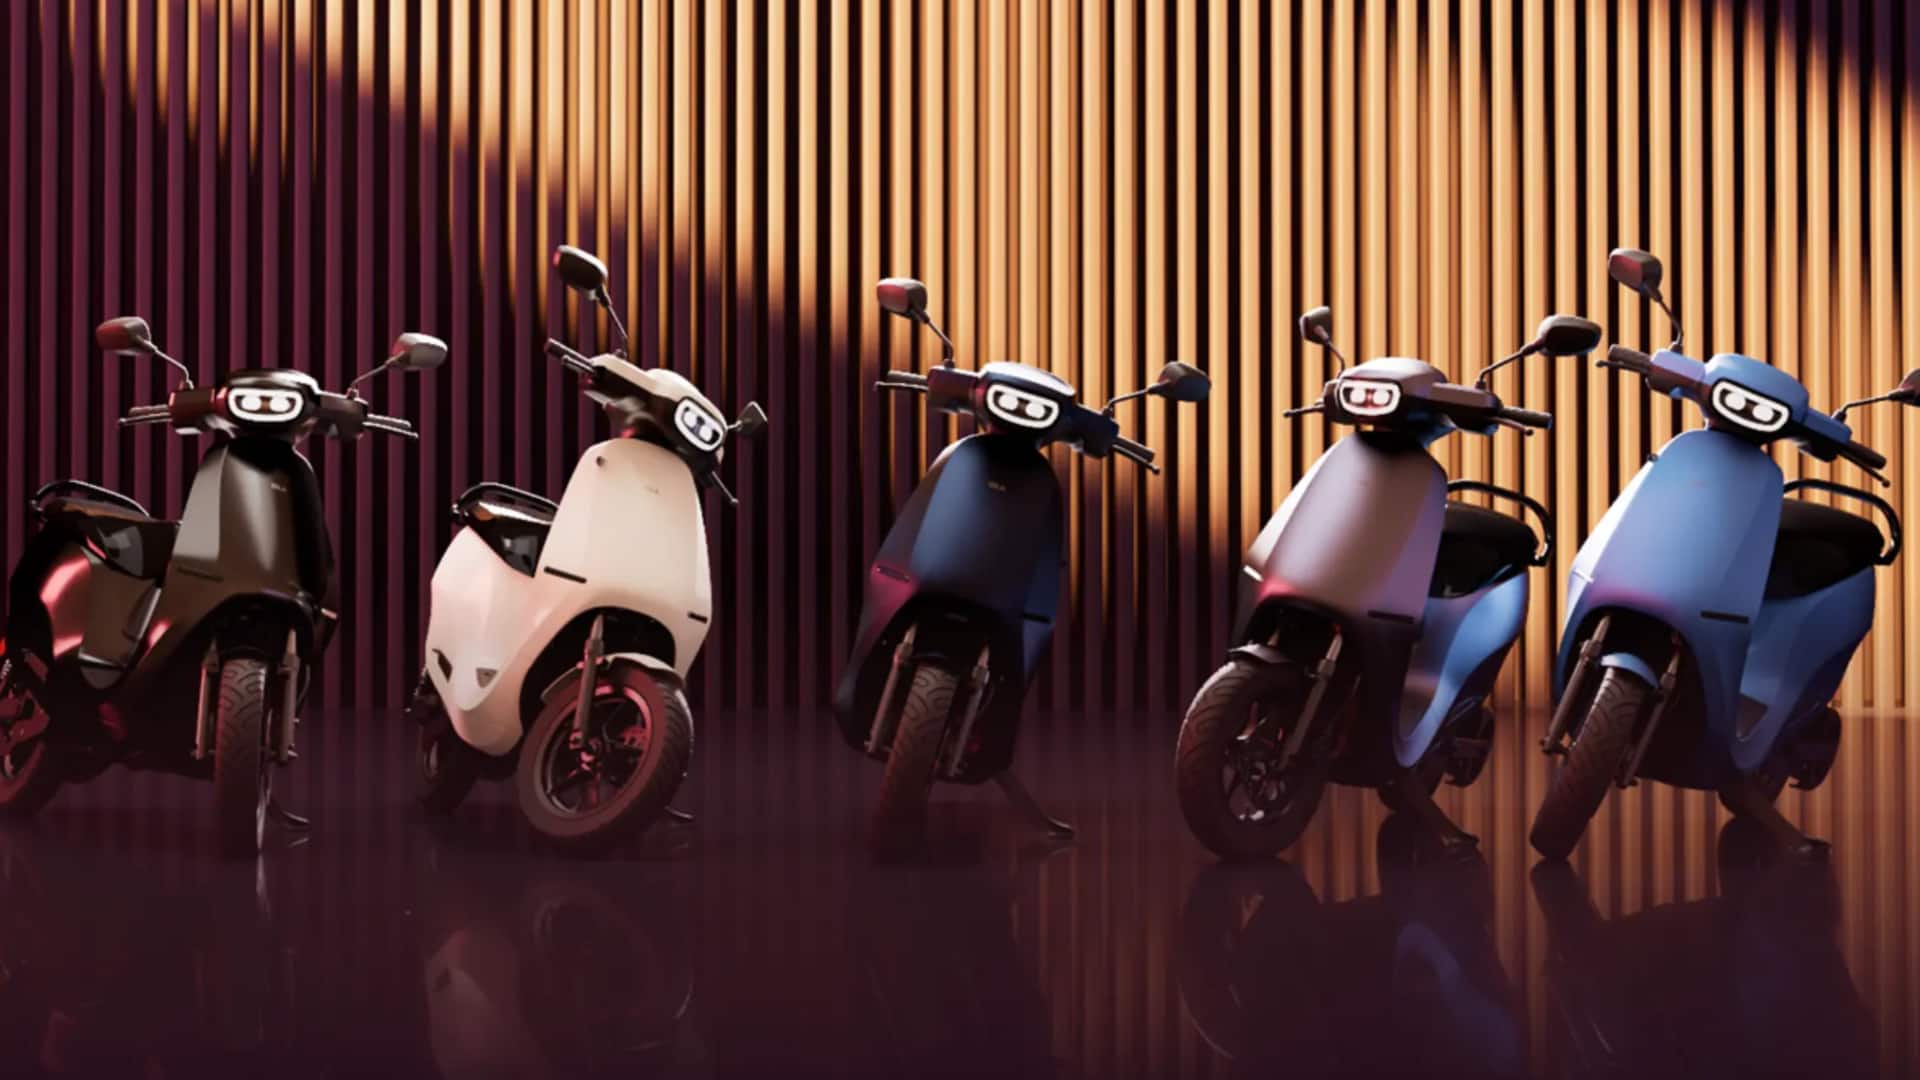 Deliveries of Ola S1 Pro Gen 2 electric scooter underway